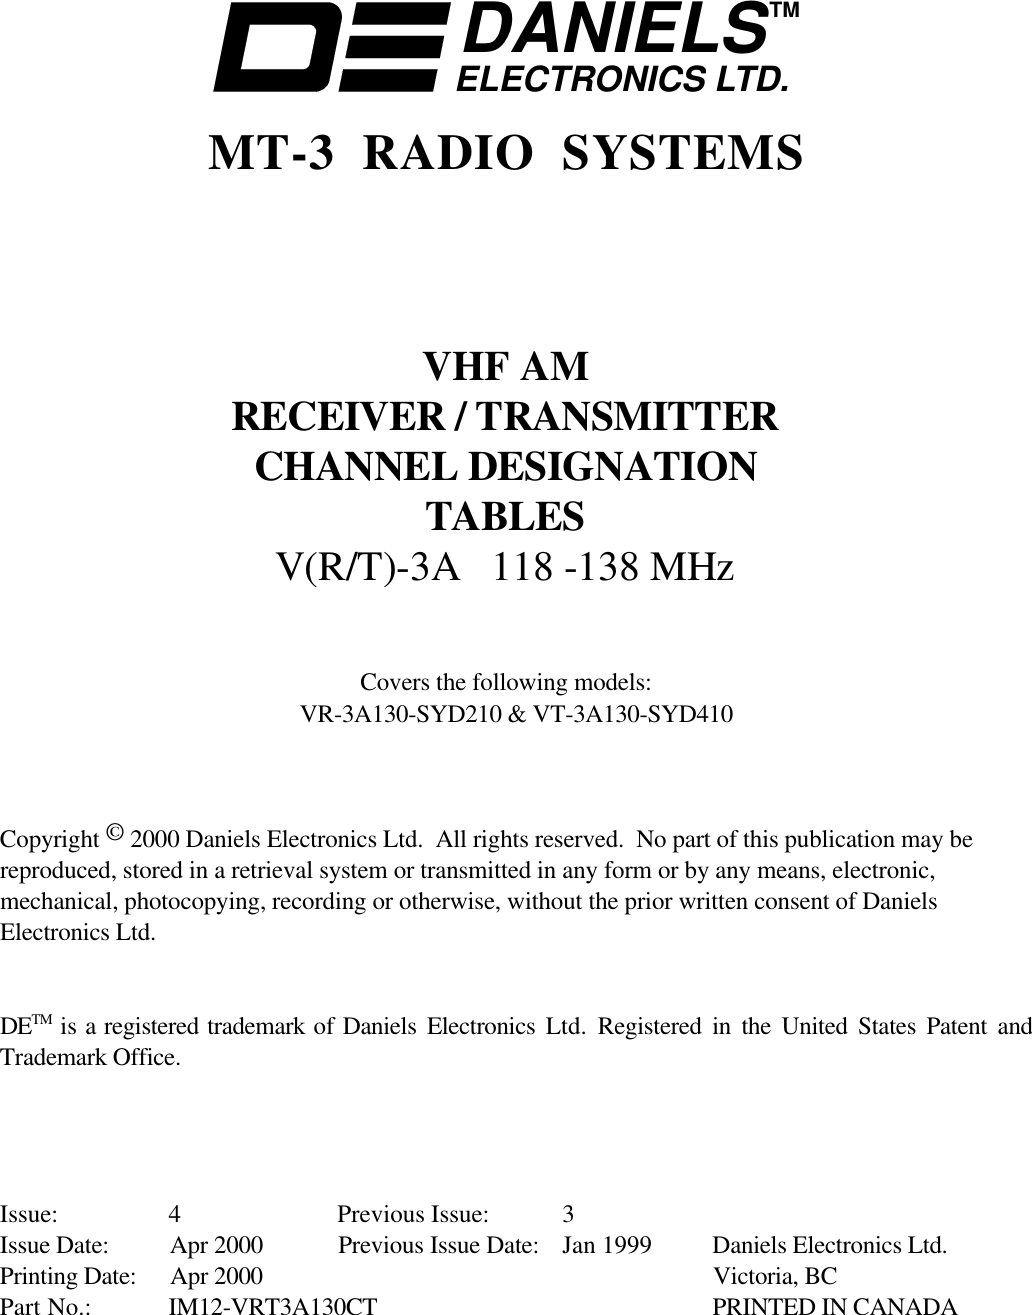 DANIELSELECTRONICS LTD.TMMT-3 RADIO SYSTEMSVHF AMRECEIVER / TRANSMITTERCHANNEL DESIGNATIONTABLESV(R/T)-3A   118 -138 MHzCovers the following models:VR-3A130-SYD210 &amp; VT-3A130-SYD410Copyright © 2000 Daniels Electronics Ltd.  All rights reserved.  No part of this publication may bereproduced, stored in a retrieval system or transmitted in any form or by any means, electronic,mechanical, photocopying, recording or otherwise, without the prior written consent of DanielsElectronics Ltd.DETM is a registered trademark of Daniels Electronics Ltd.  Registered in the United States Patent andTrademark Office.Issue: 4 Previous Issue:  3Issue Date: Apr 2000 Previous Issue Date: Jan 1999 Daniels Electronics Ltd.Printing Date: Apr 2000 Victoria, BCPart No.: IM12-VRT3A130CT  PRINTED IN CANADA